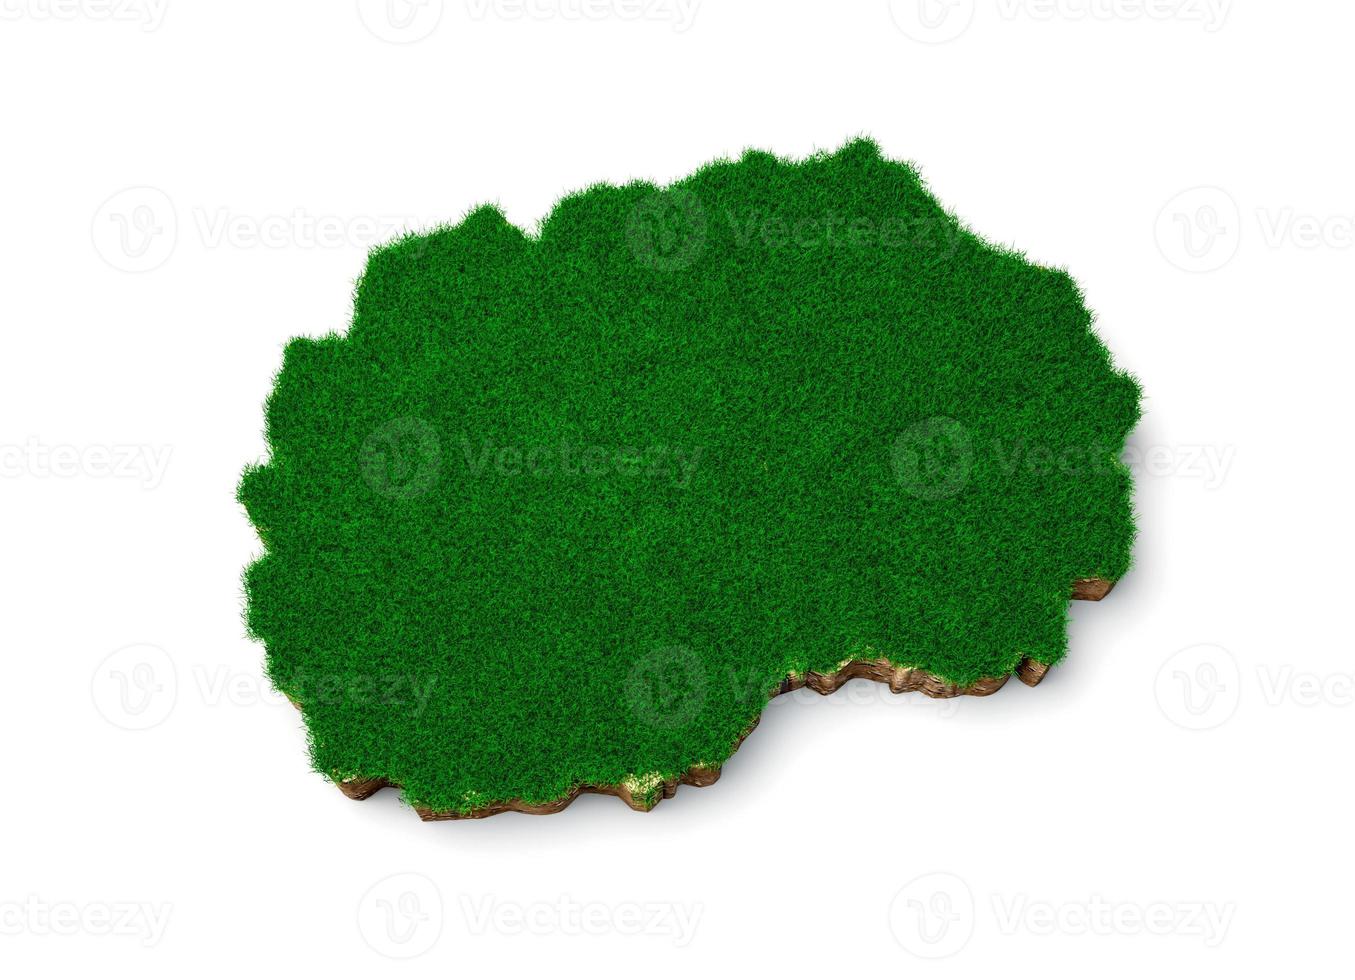 North Macedonia map soil land geology cross section with green grass 3d illustration photo